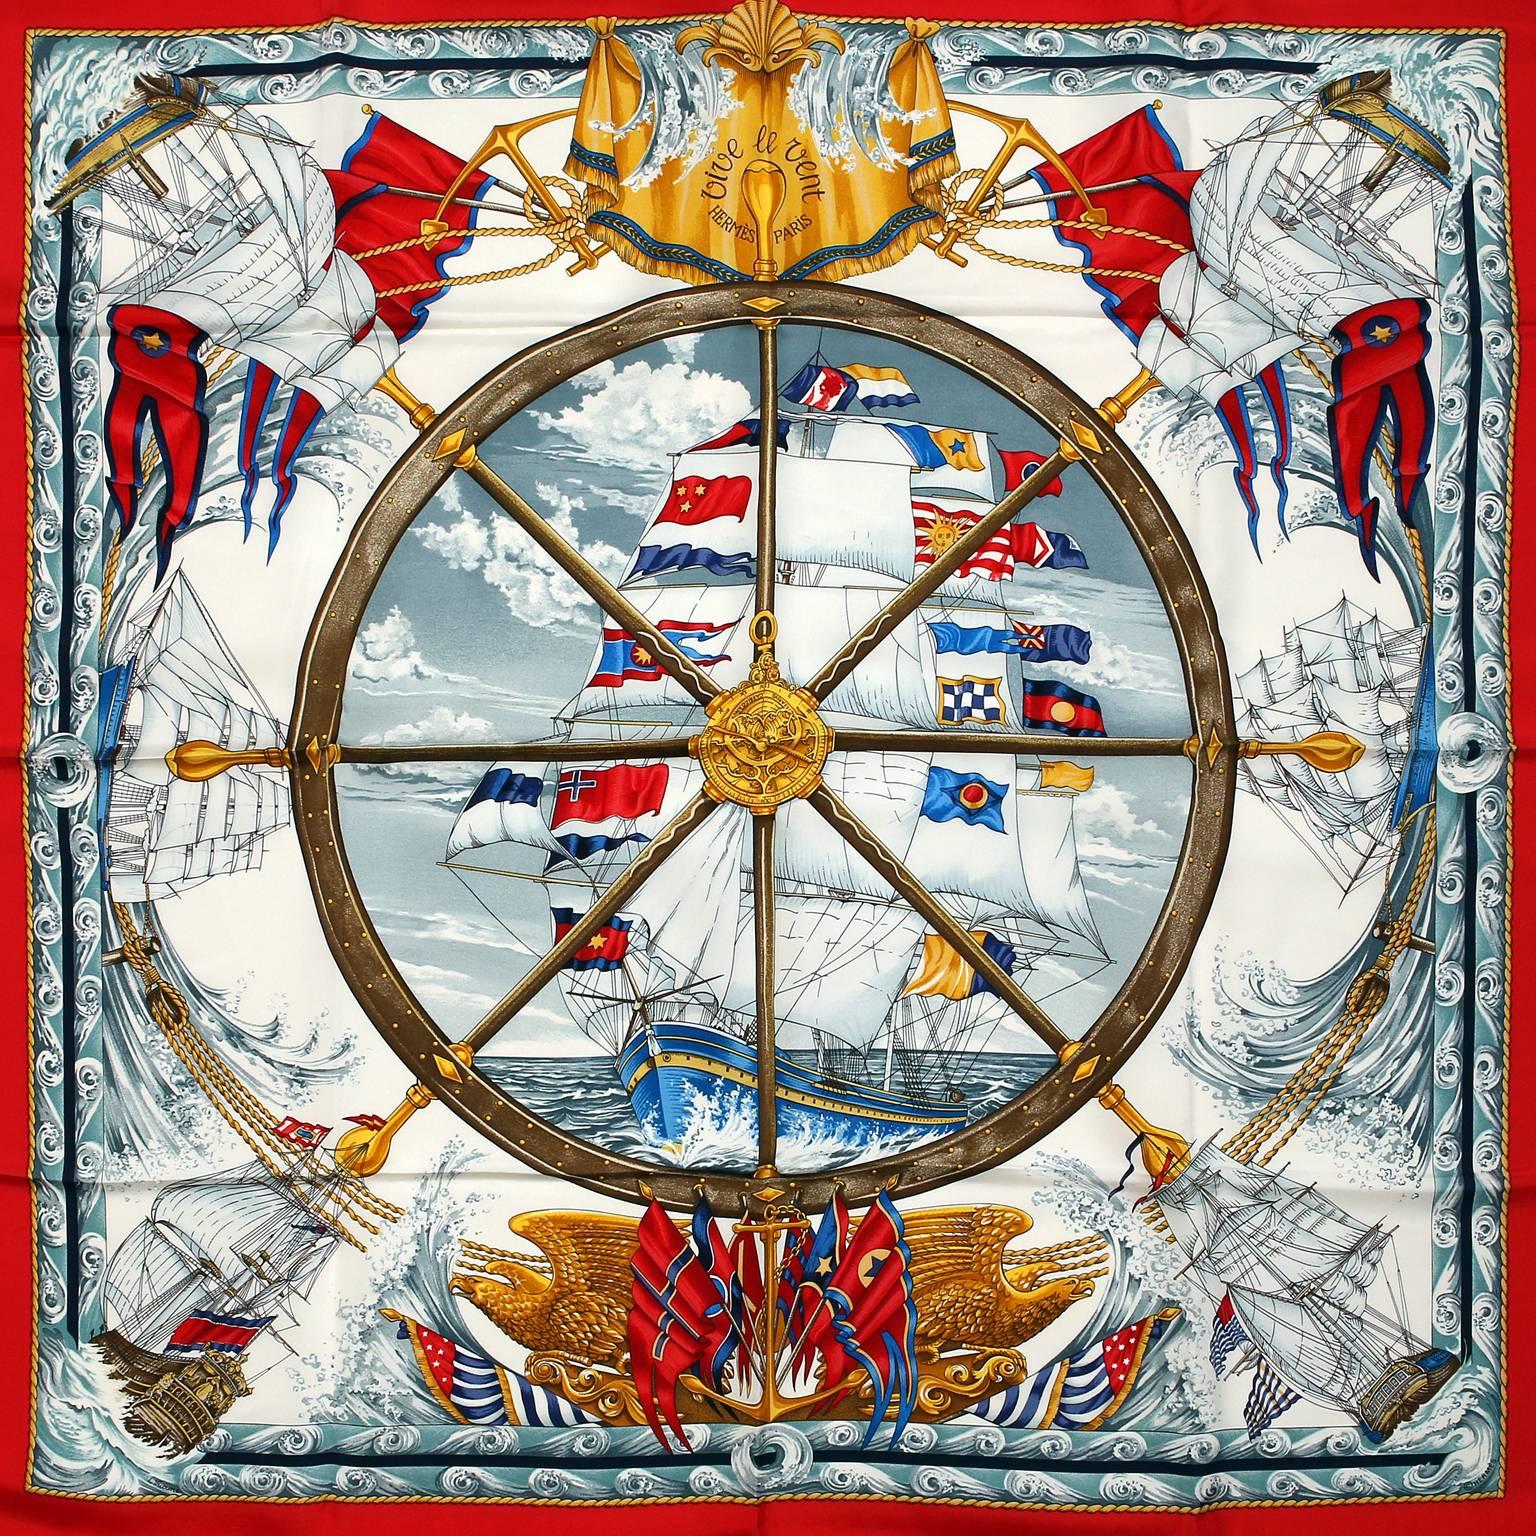 Hermès Vive le Vent 90 cm Silk Scarf- PRISTINE
Designed by Laurence Bourthoumieux and first issued in 1992.
White background with red border and gold accents.  Nautical theme with sailing ships and waving multicolored flags.  100% silk.  Made in